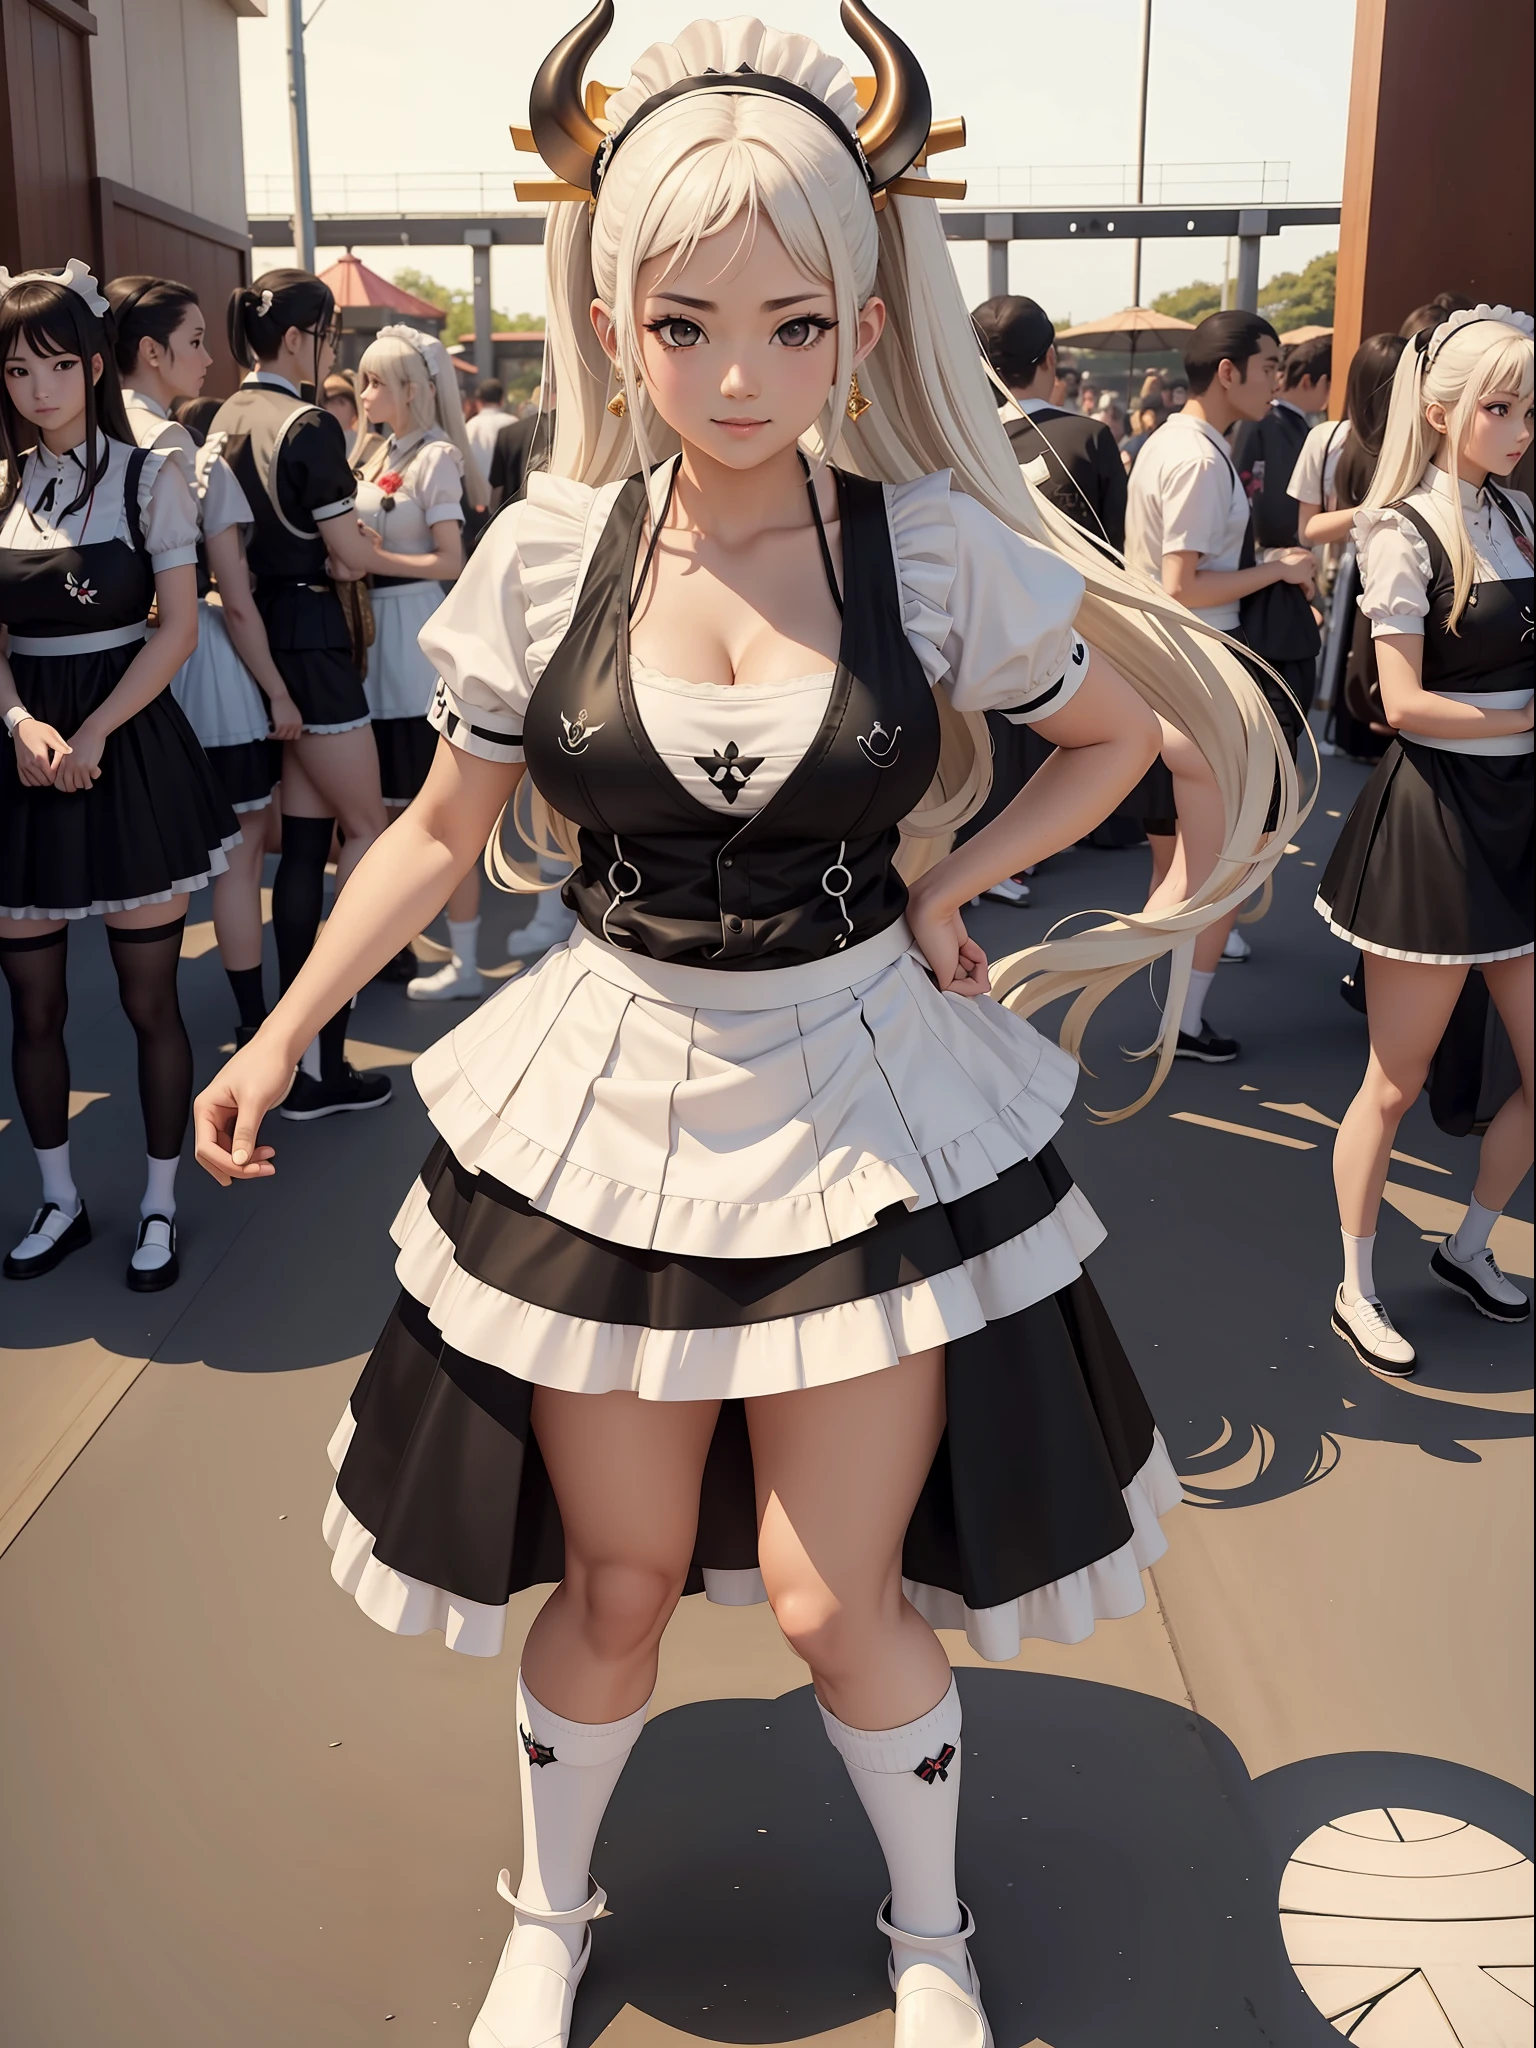 (full body/standing:1.5) yamatowanpi, ((wearing maid's clothing+black with short white skirt+white socks on legs:1.5)). ((Inside an amusement park crowded with spectators)). (clothing+extremely+tight+body:1.5). ((Yamatowanpi is doing exhibitionist poses)), standing is not doing hunched poses, it's smiling, looking at the viewer. Yamato has extremely breasts (large:1.5), hyper-realism, anime, 16k, masterpiece, UHD, high details, best quality